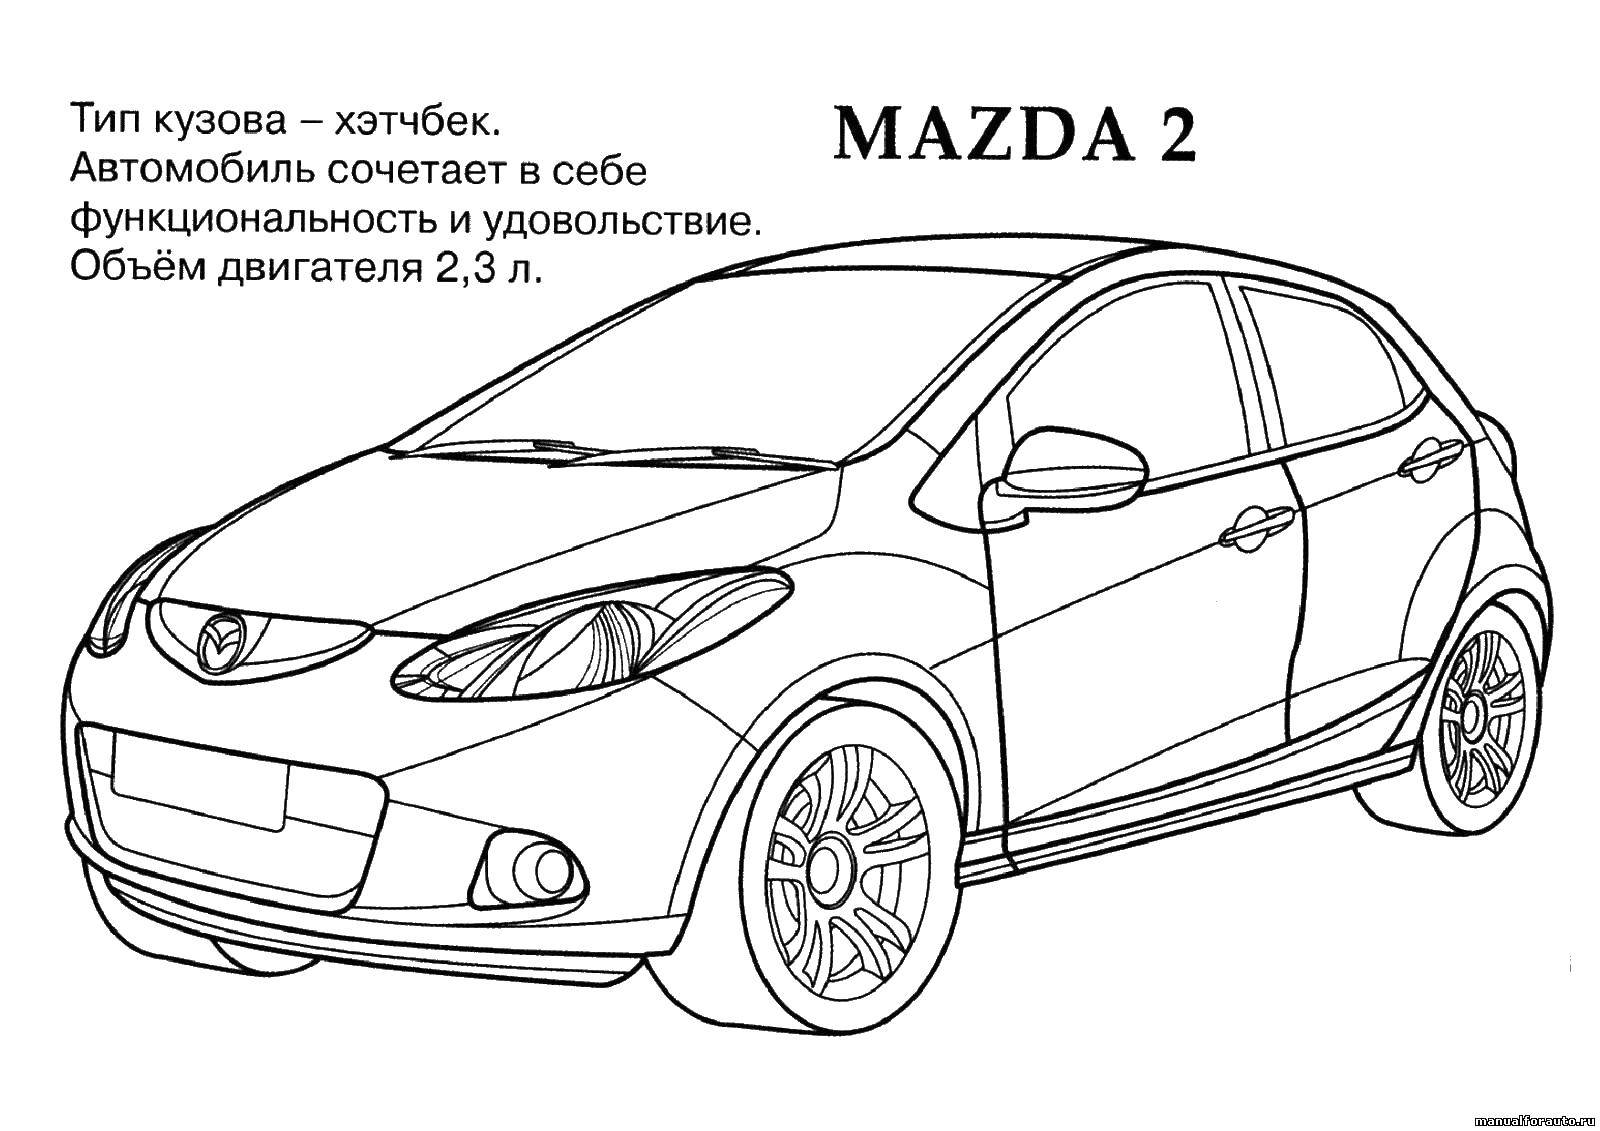 Coloring Mazda 2. Category coloring. Tags:  Transport, car.